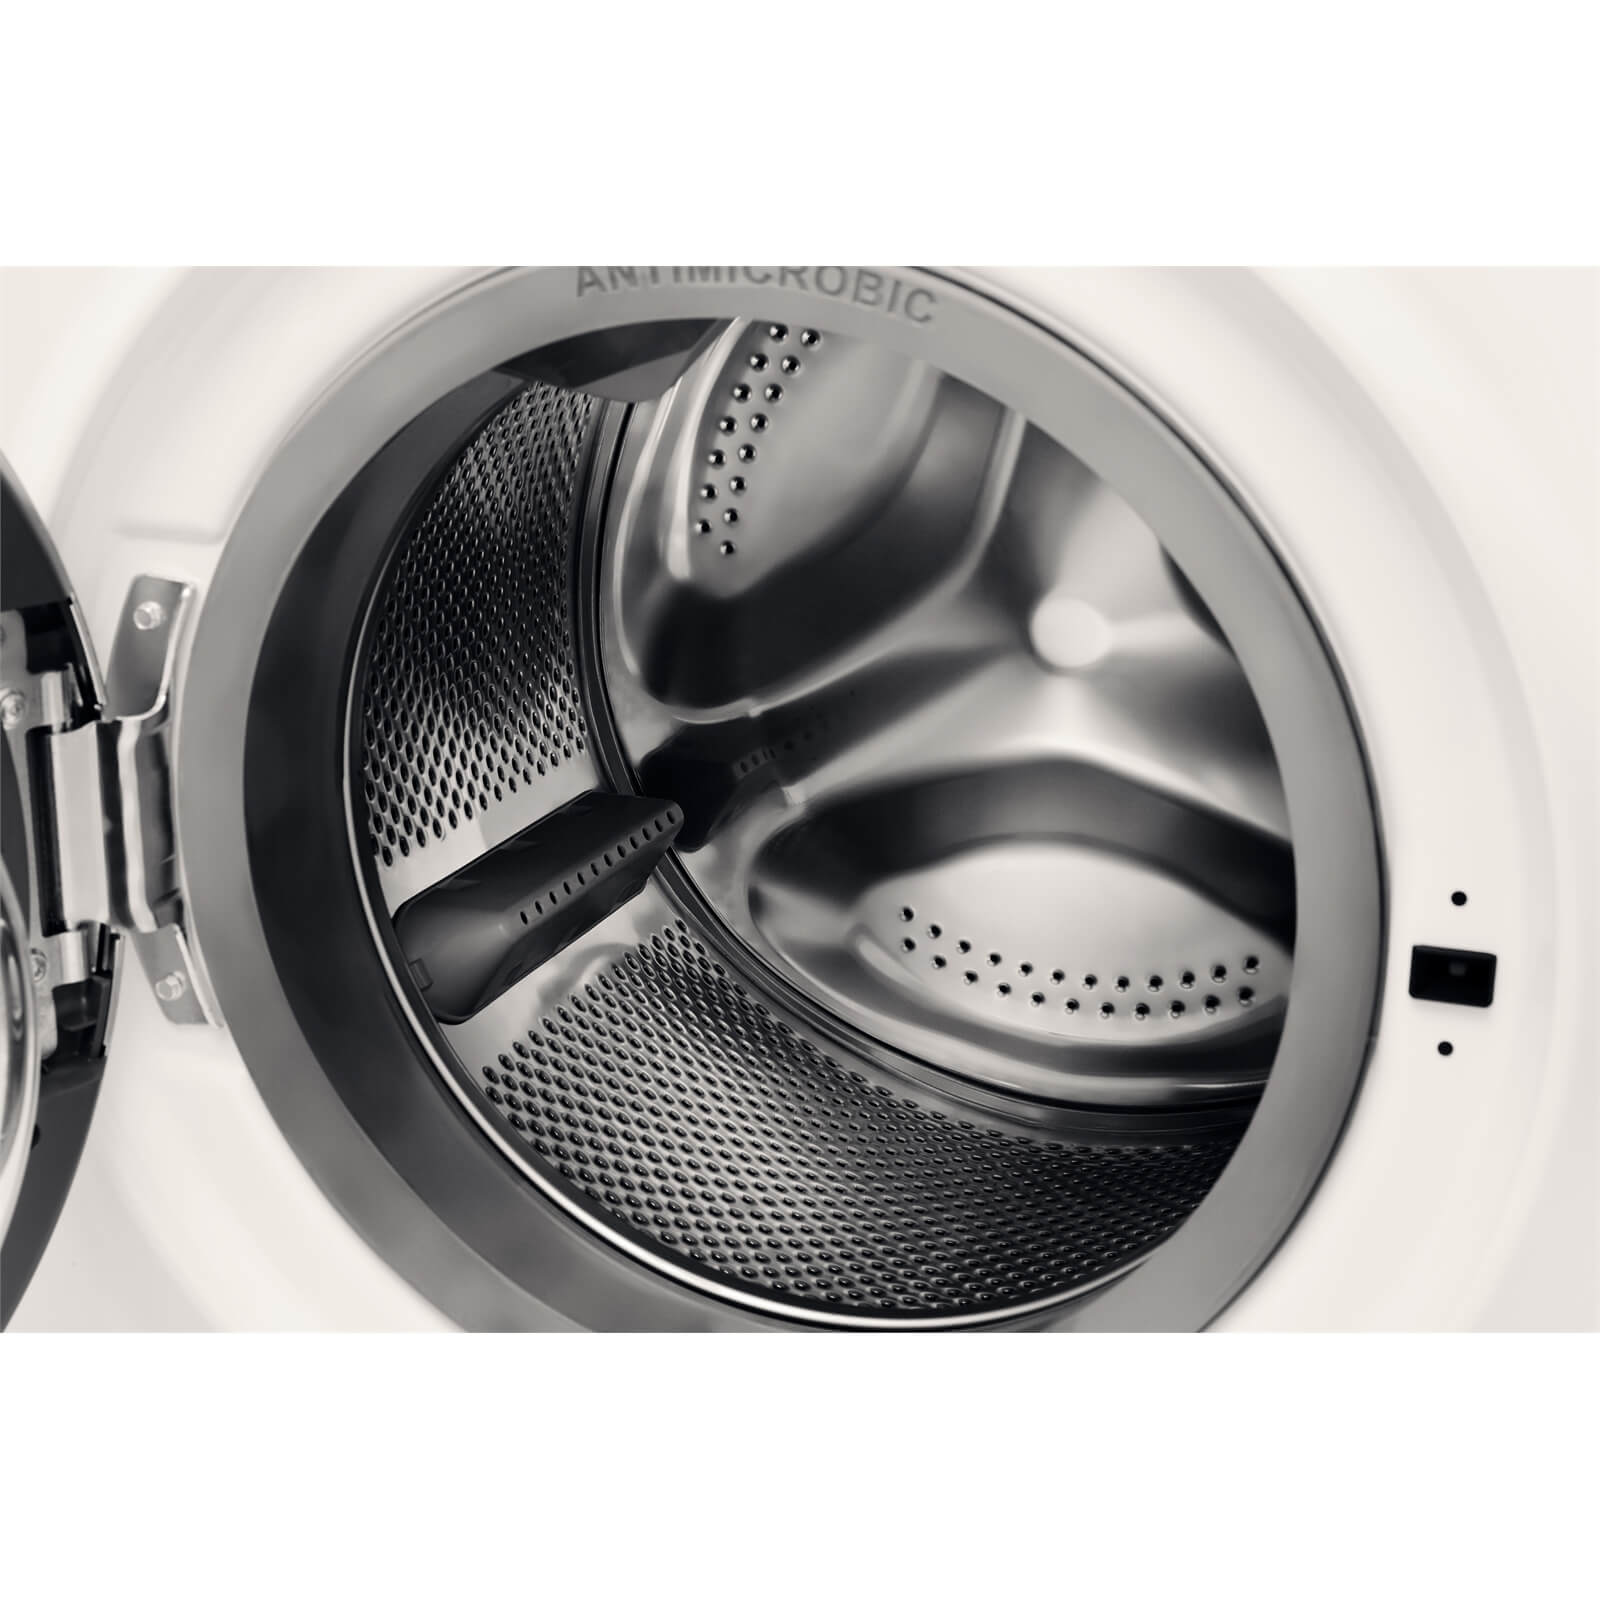 Hotpoint ActiveCare NM11 946 WC A Washing Machine - White